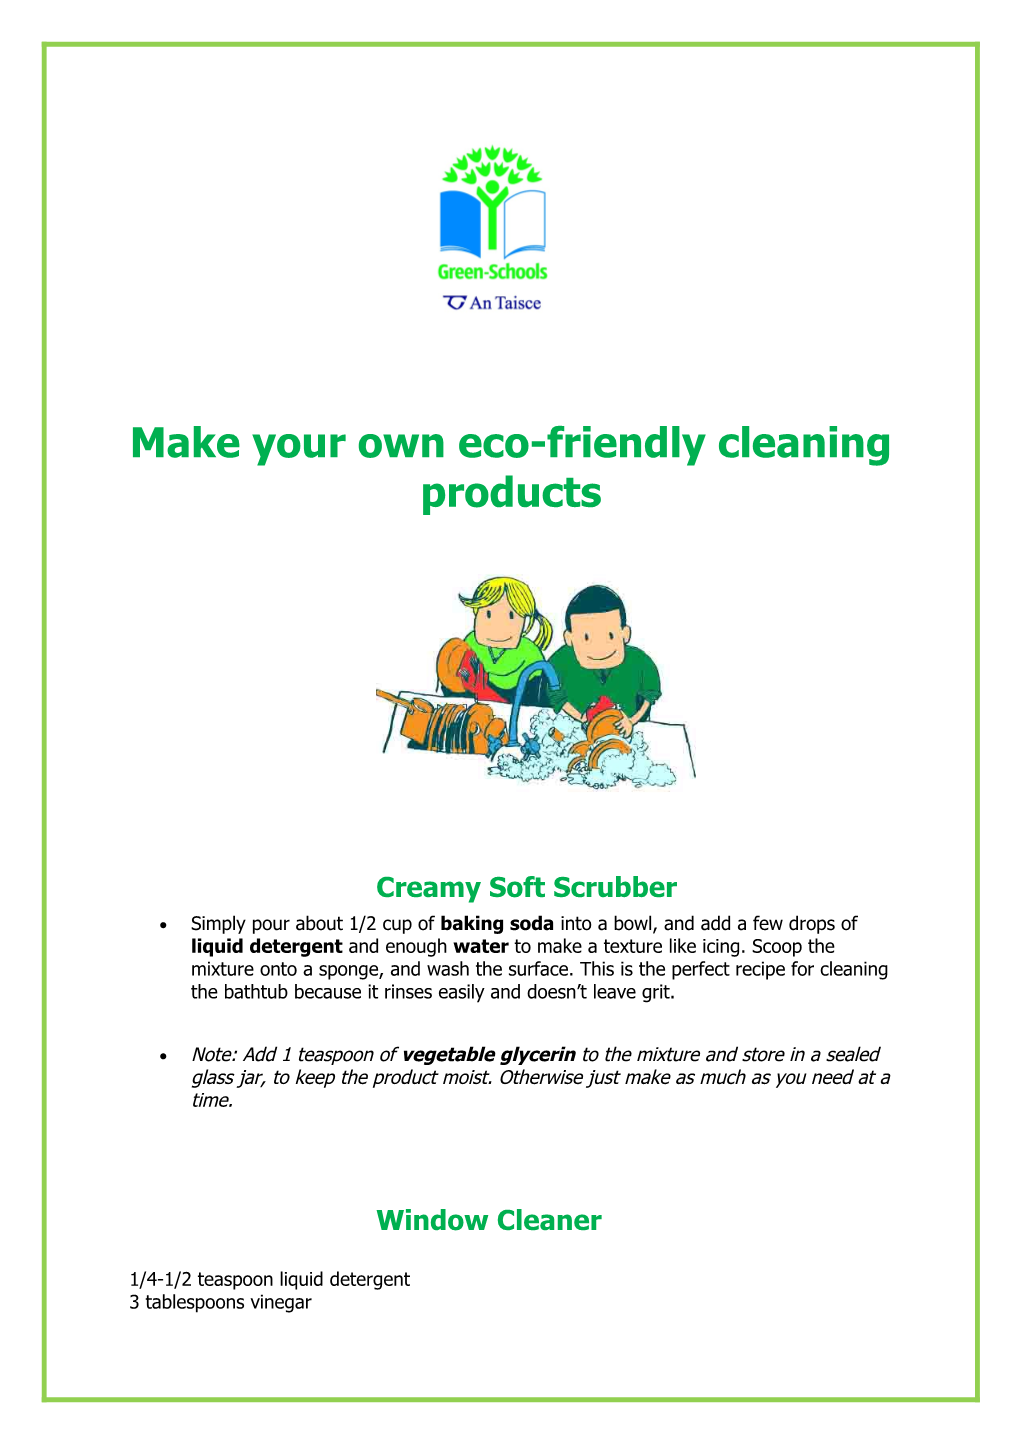 Make Yourown Eco-Friendly Cleaning Products